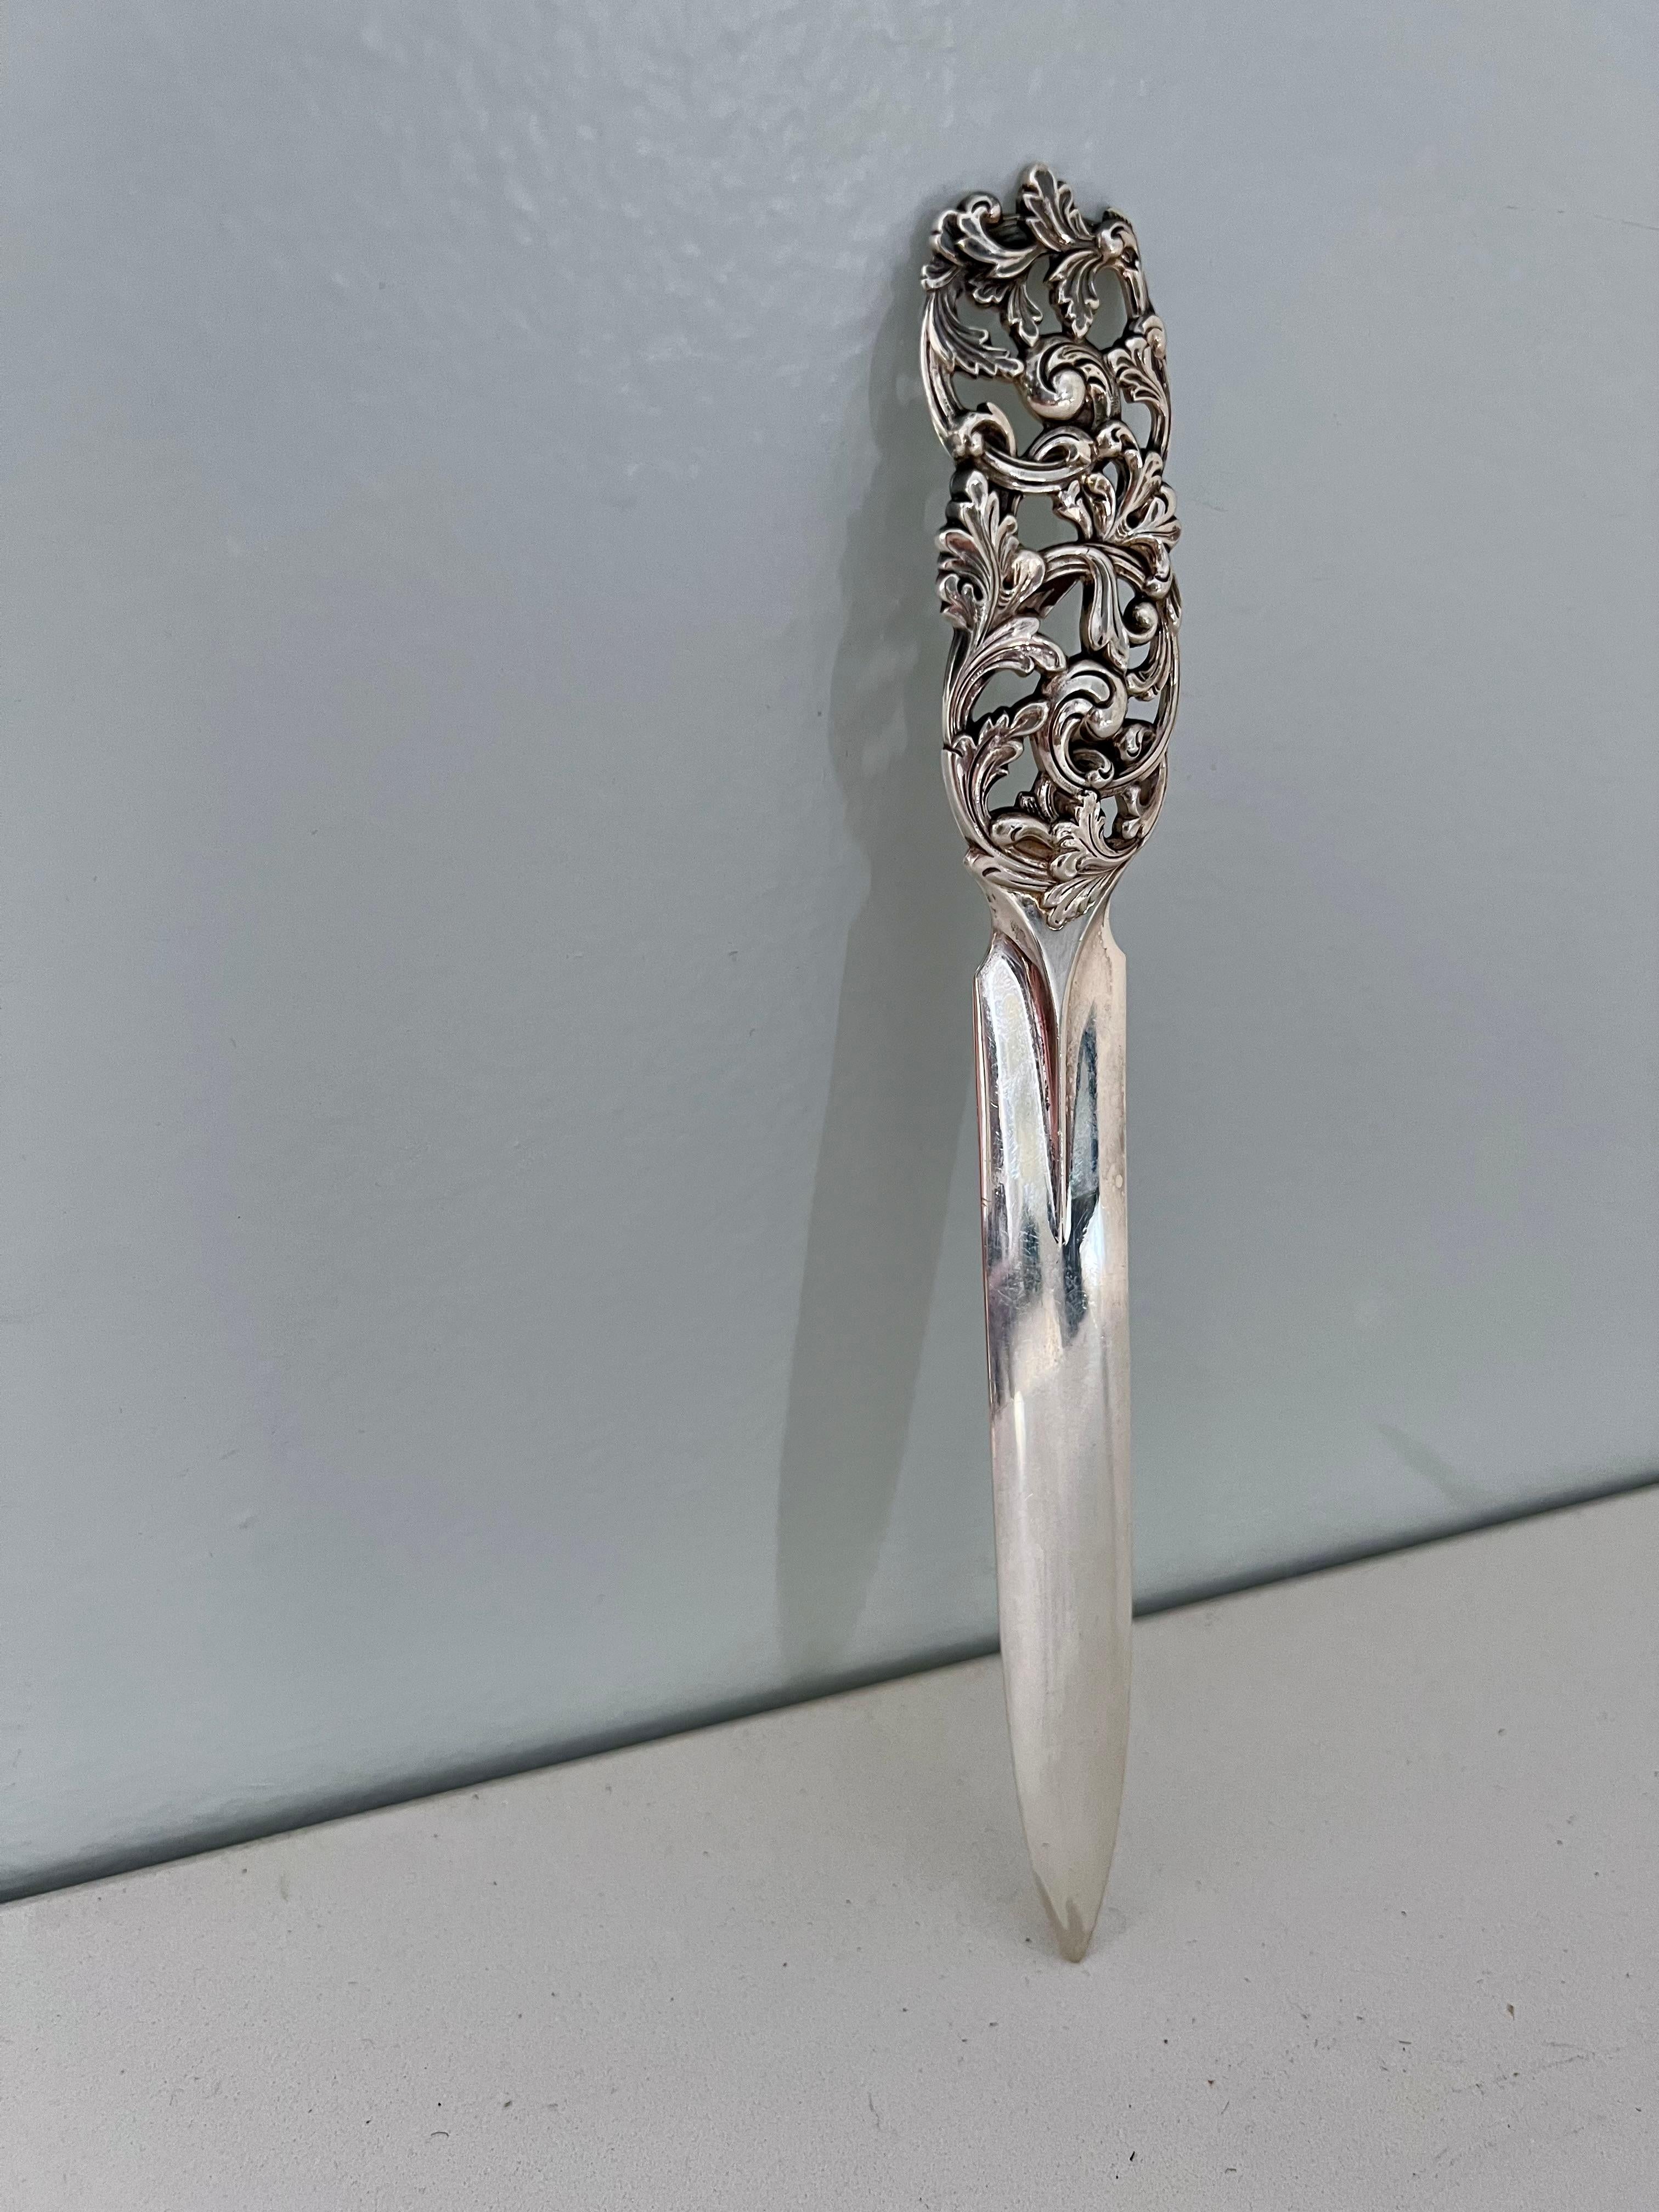 Hand-Crafted Scandinavian Sterling Silver Repousse Letter Opener